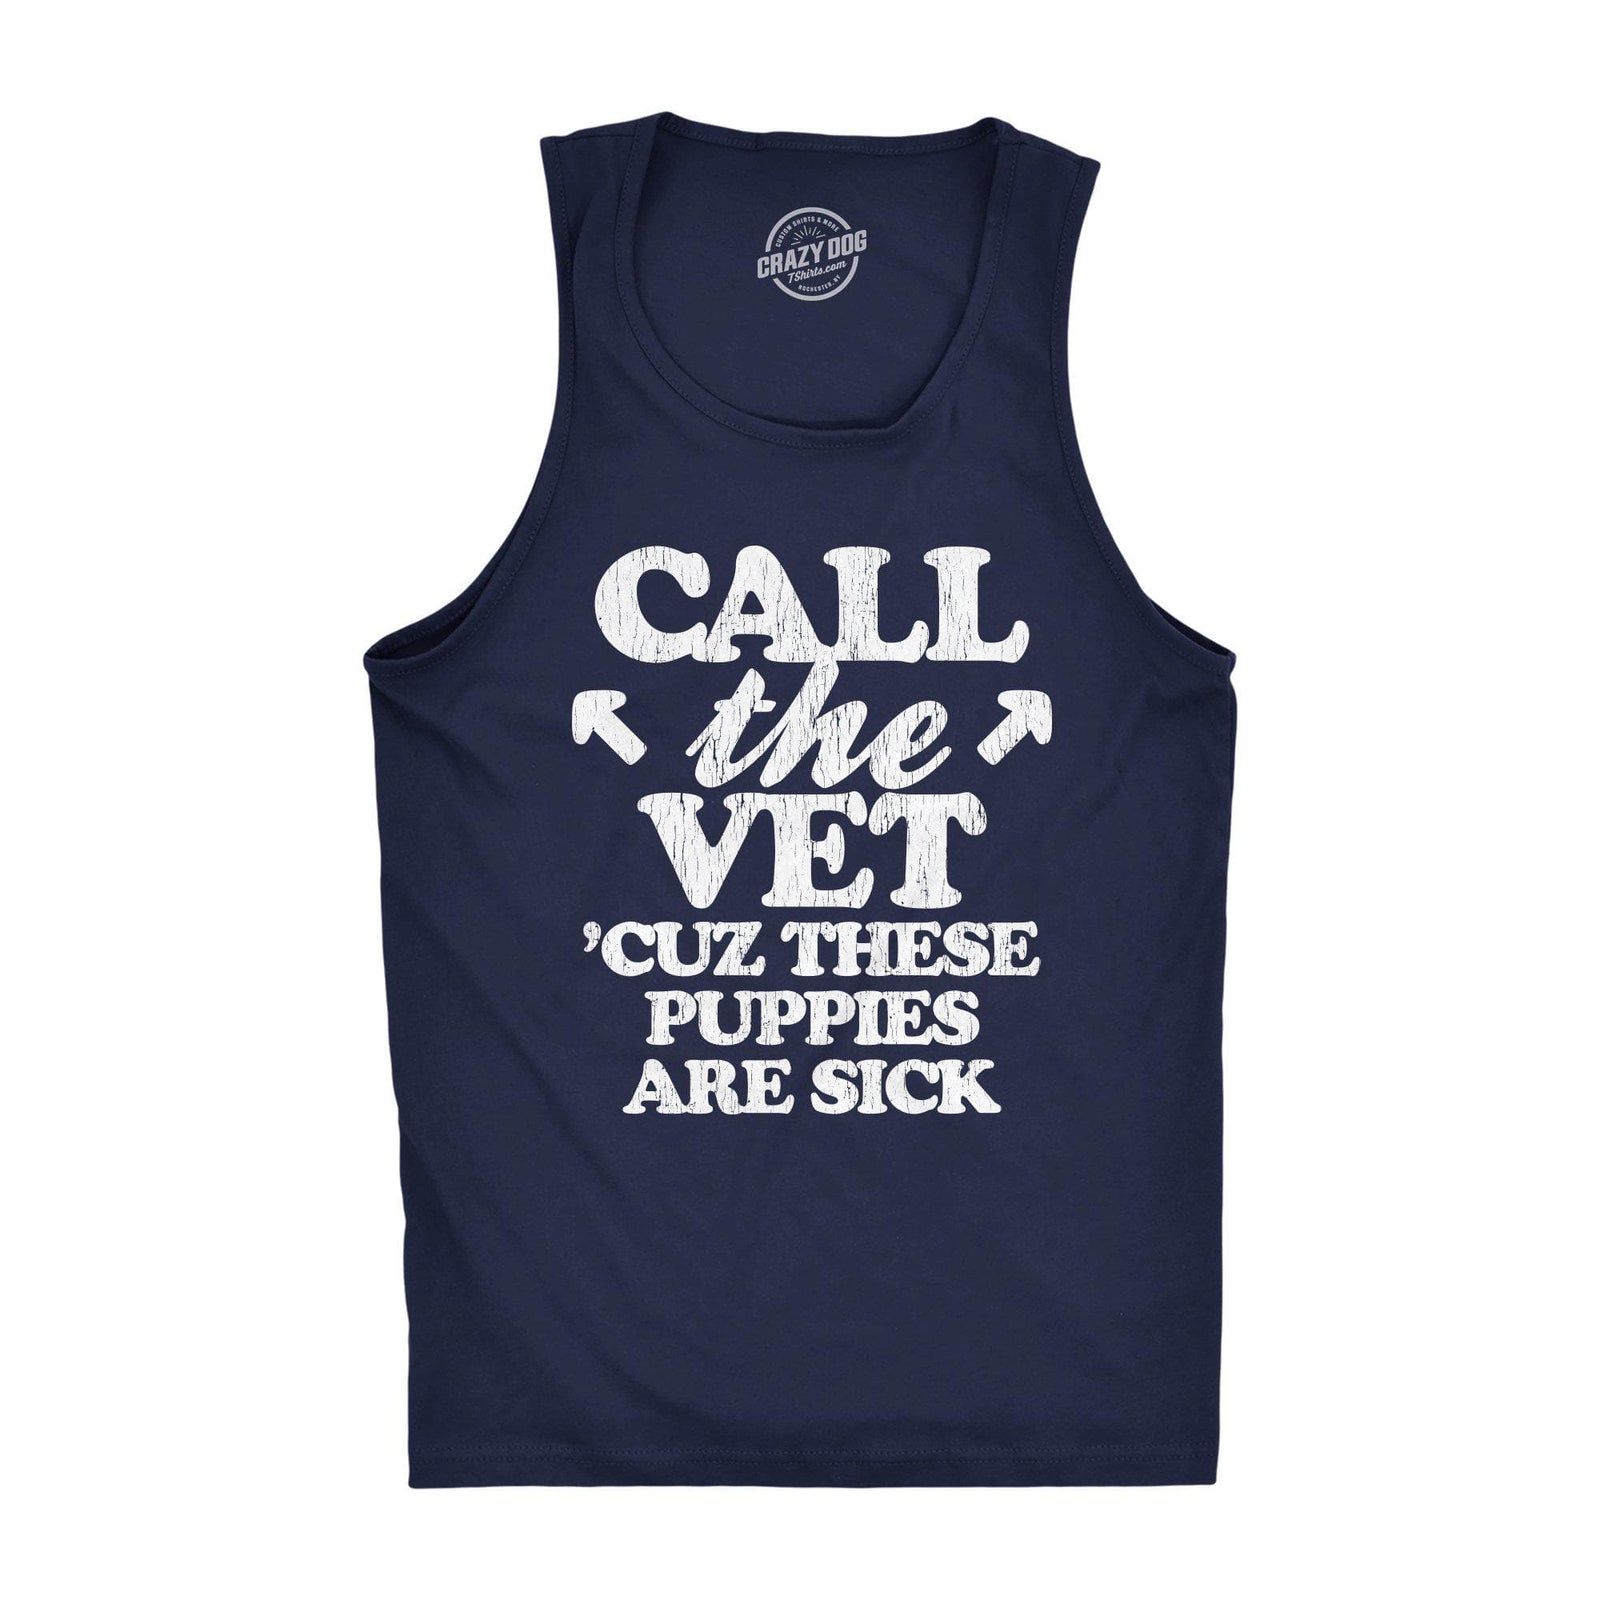 Funny Workout Tanks and Shirt for Women, Men and Youth, Fitness Shirt, Workout  Shirts, Exercise Shirt, Gym Clothes for Man and Ladies -  Canada